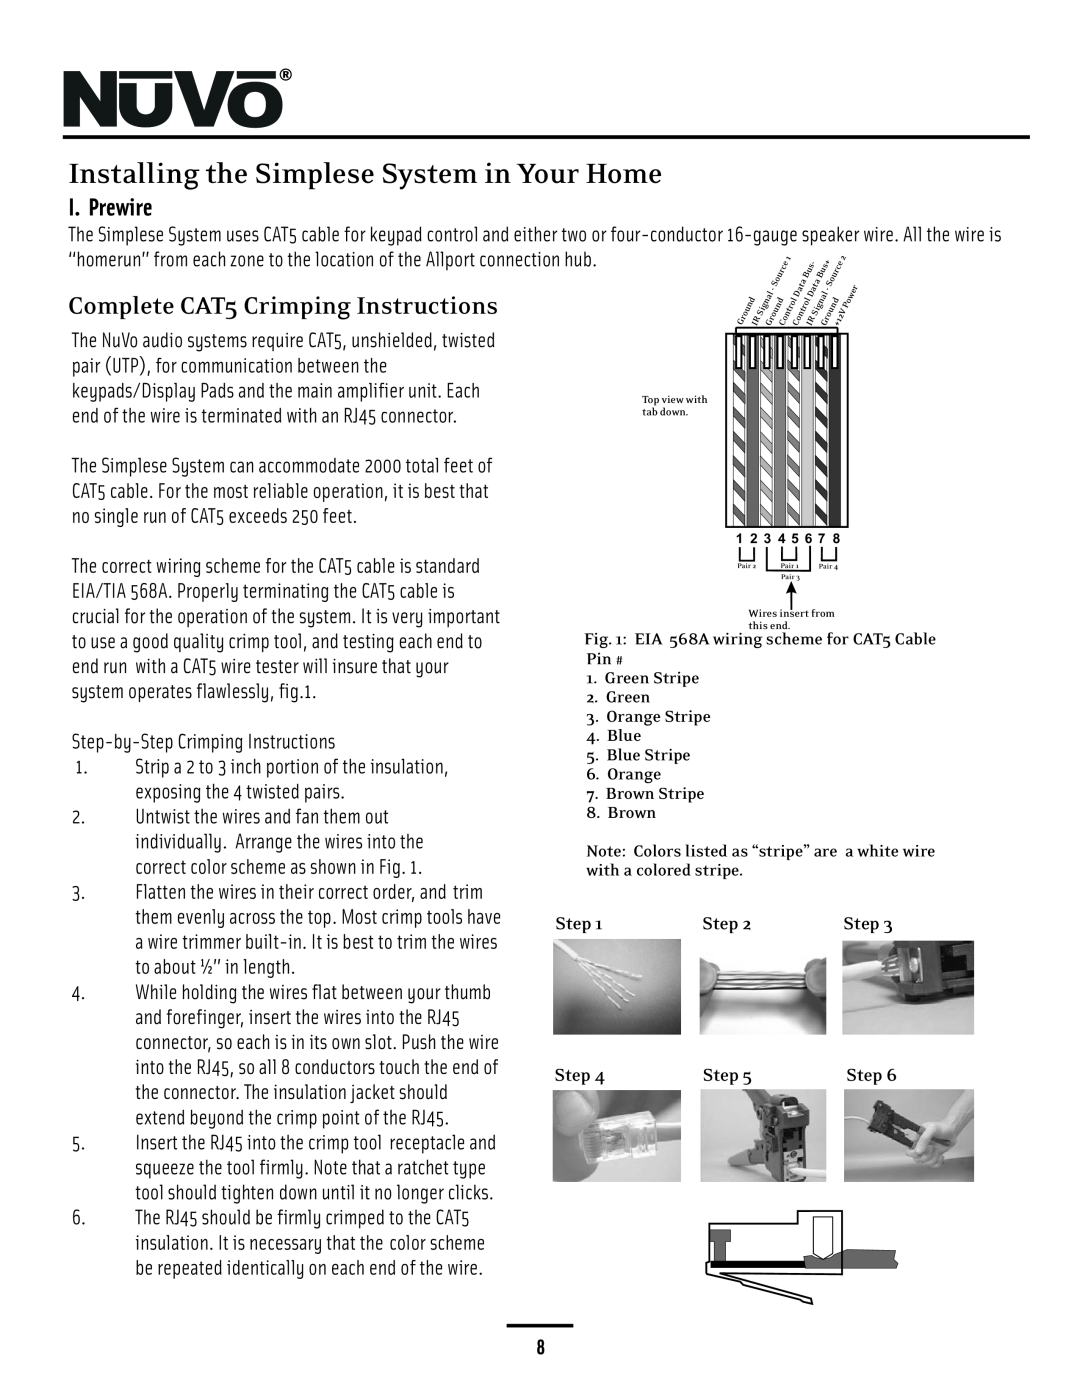 Nuvo NV-A4DS-UK Installing the Simplese System in Your Home, Complete CAT5 Crimping Instructions, I. Prewire 